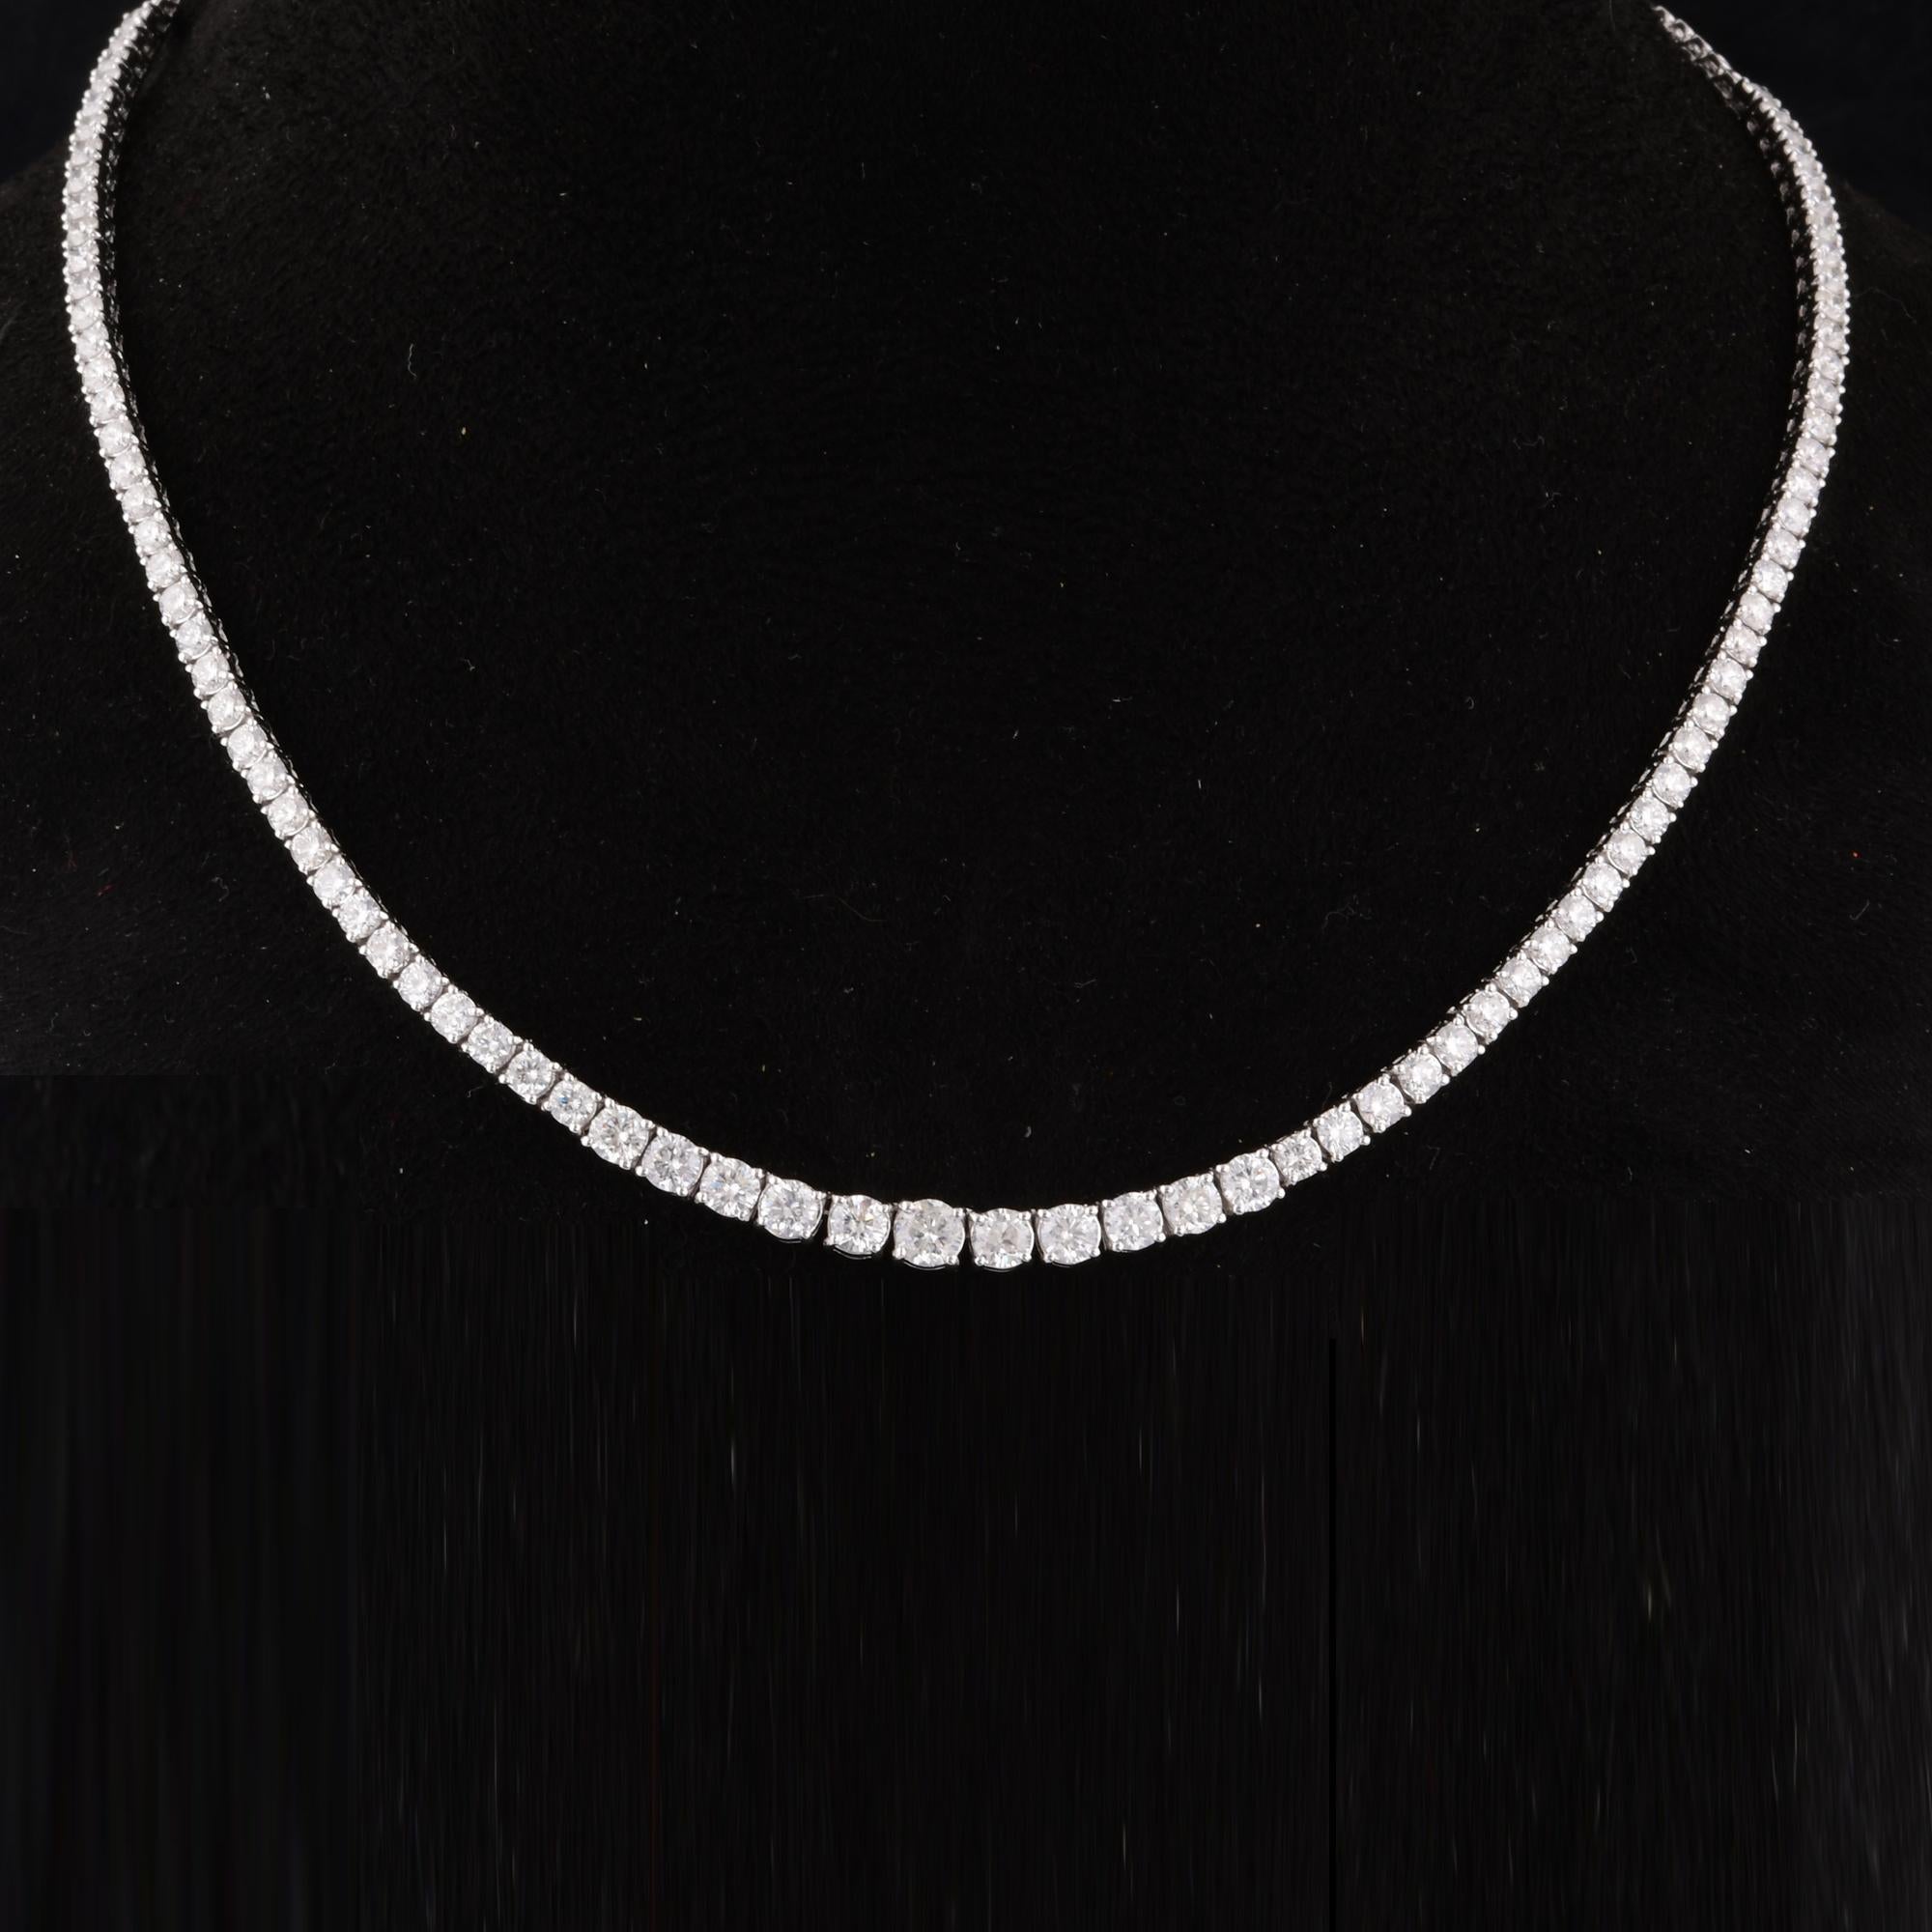 Round Cut Real 7.18 Carat SI Clarity HI Color Diamond Chain Necklace 18 Karat White Gold For Sale